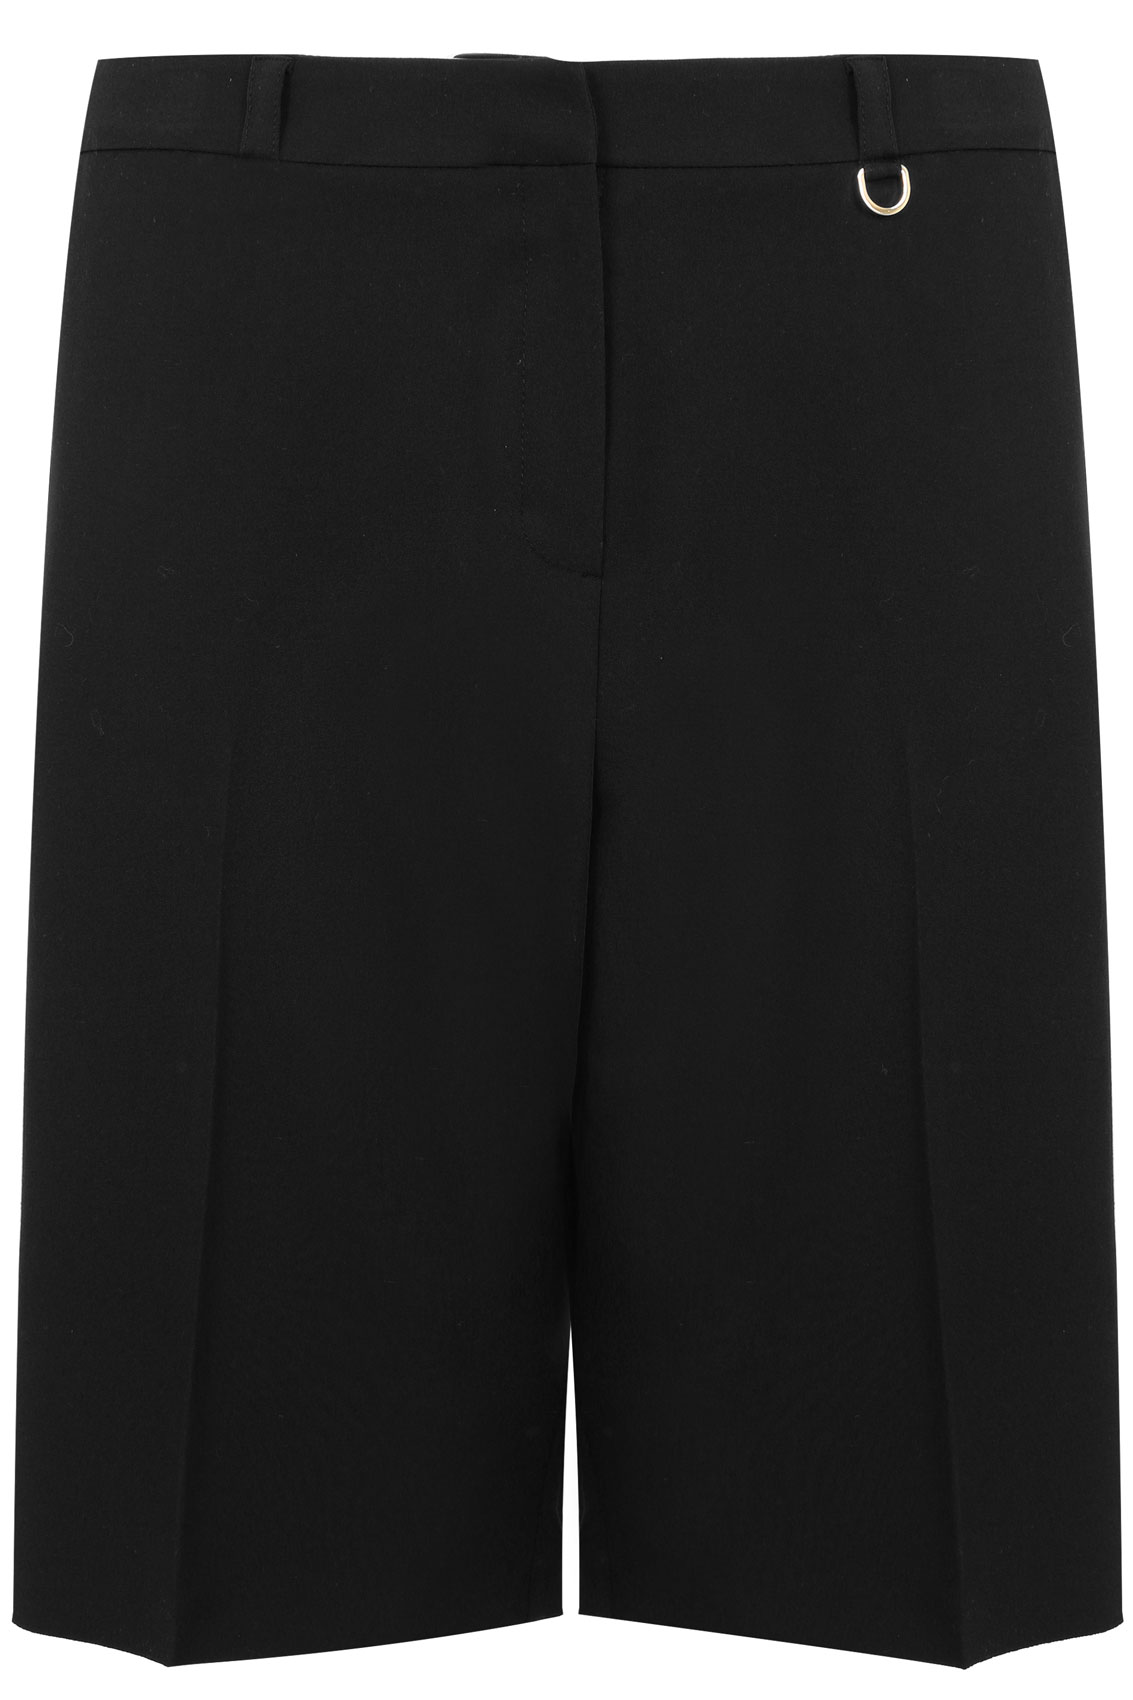 Black Tailored Shorts Plus Size 14 to 28